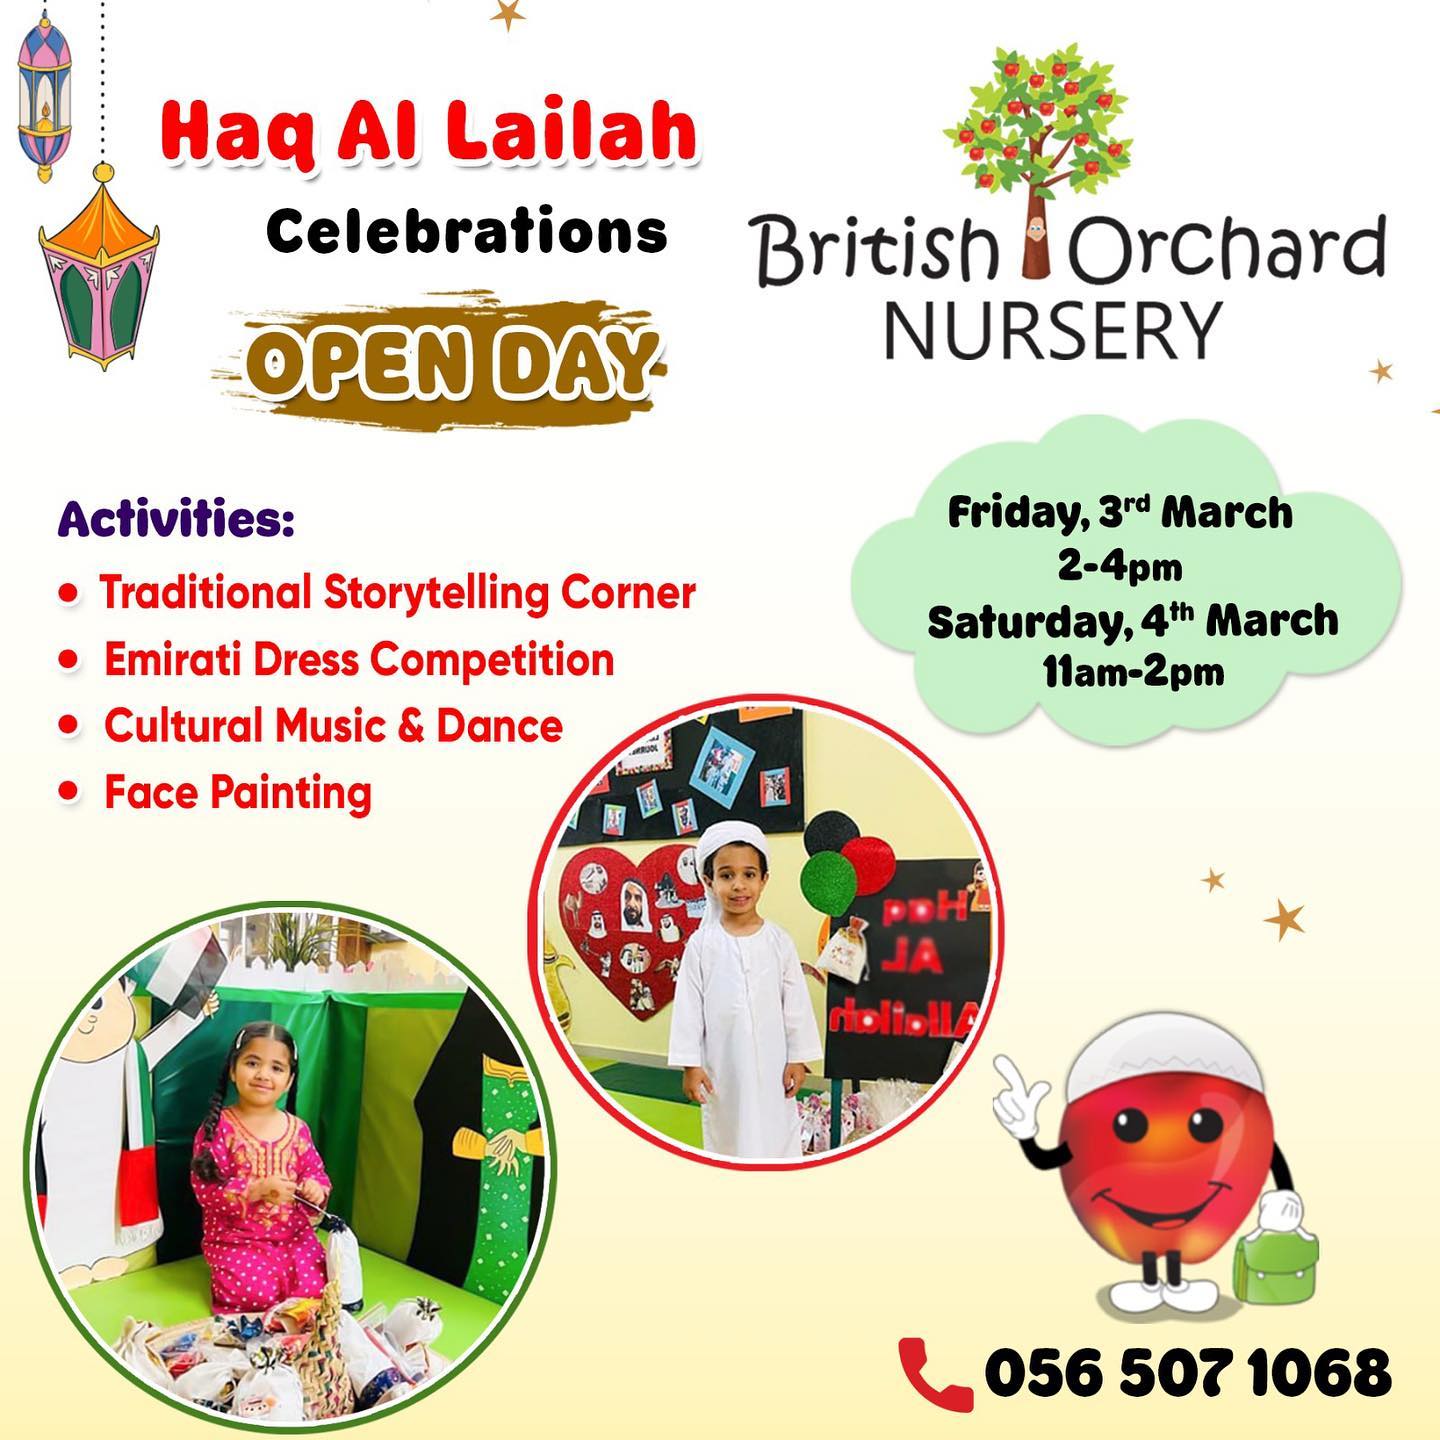 You're invited to celebrate Haq El Lailah at British Orchard Nursery! 🏮🤩